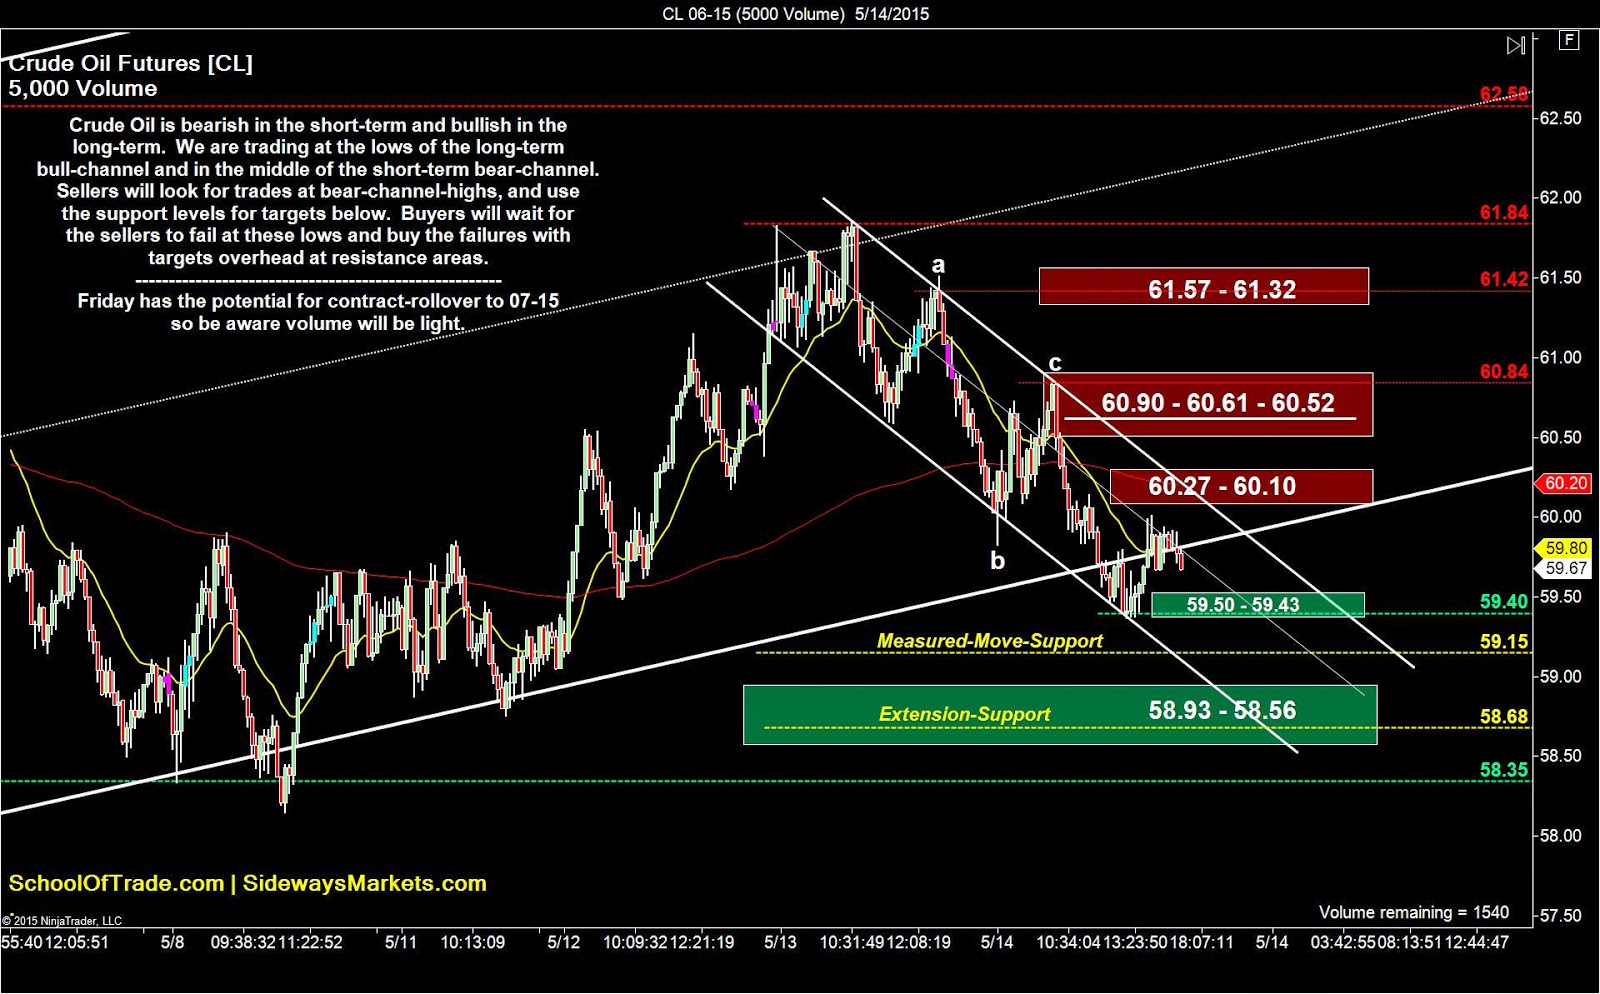 Day Trading Crude Oil Futures - 